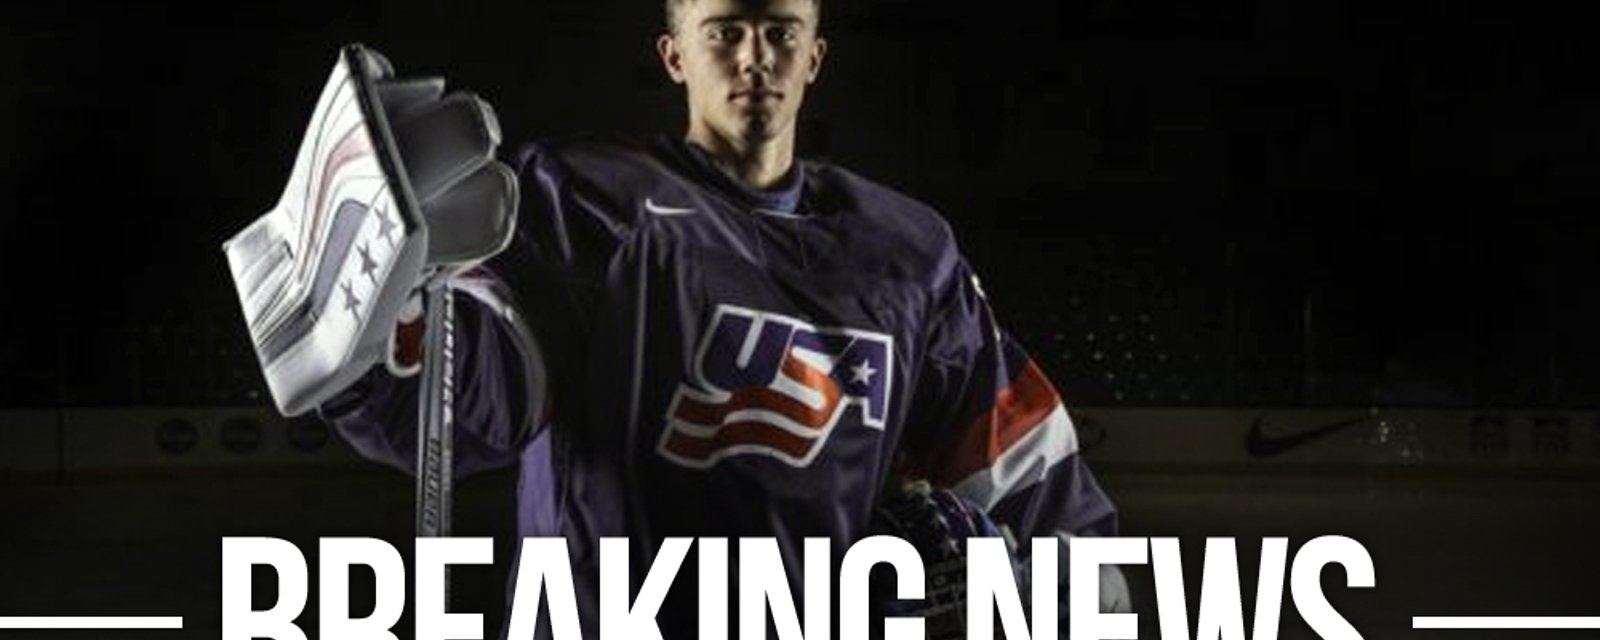 Top prospect and Team USA hero Spencer Knight officially joins the NHL